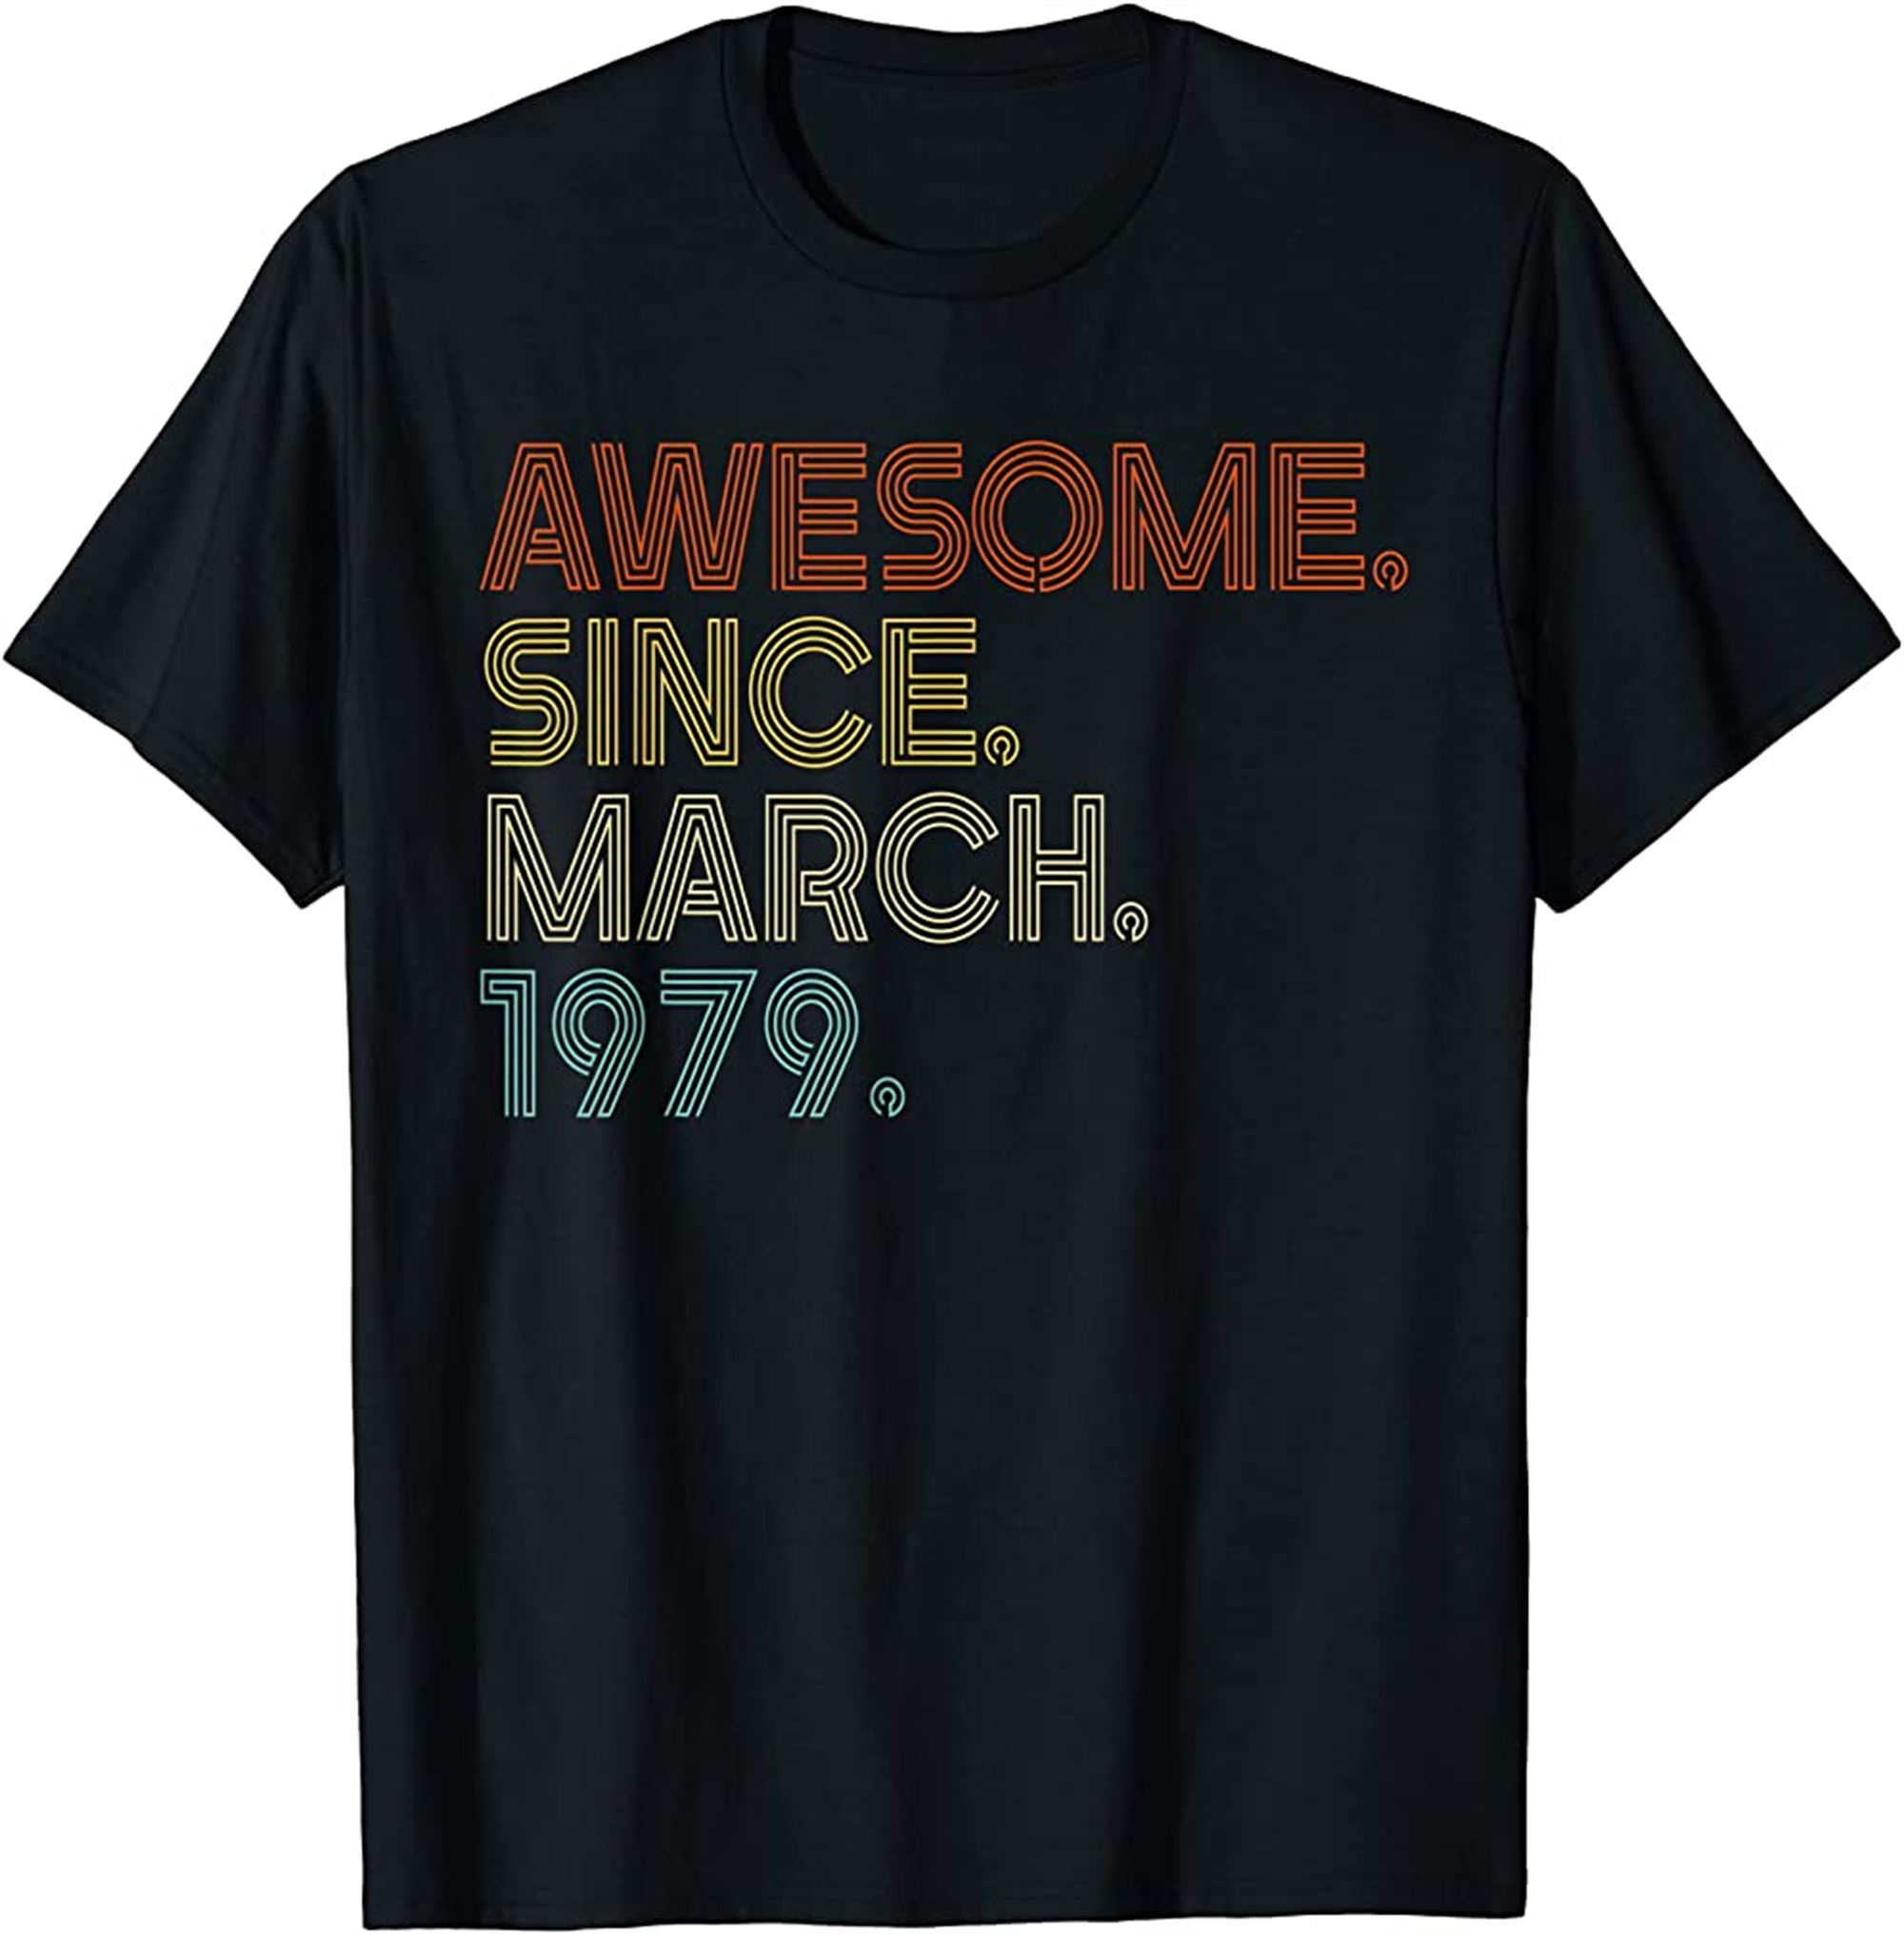 Awesome Since March 1979 Vintage 43th Birthday T-shirt Size Up To 5xl